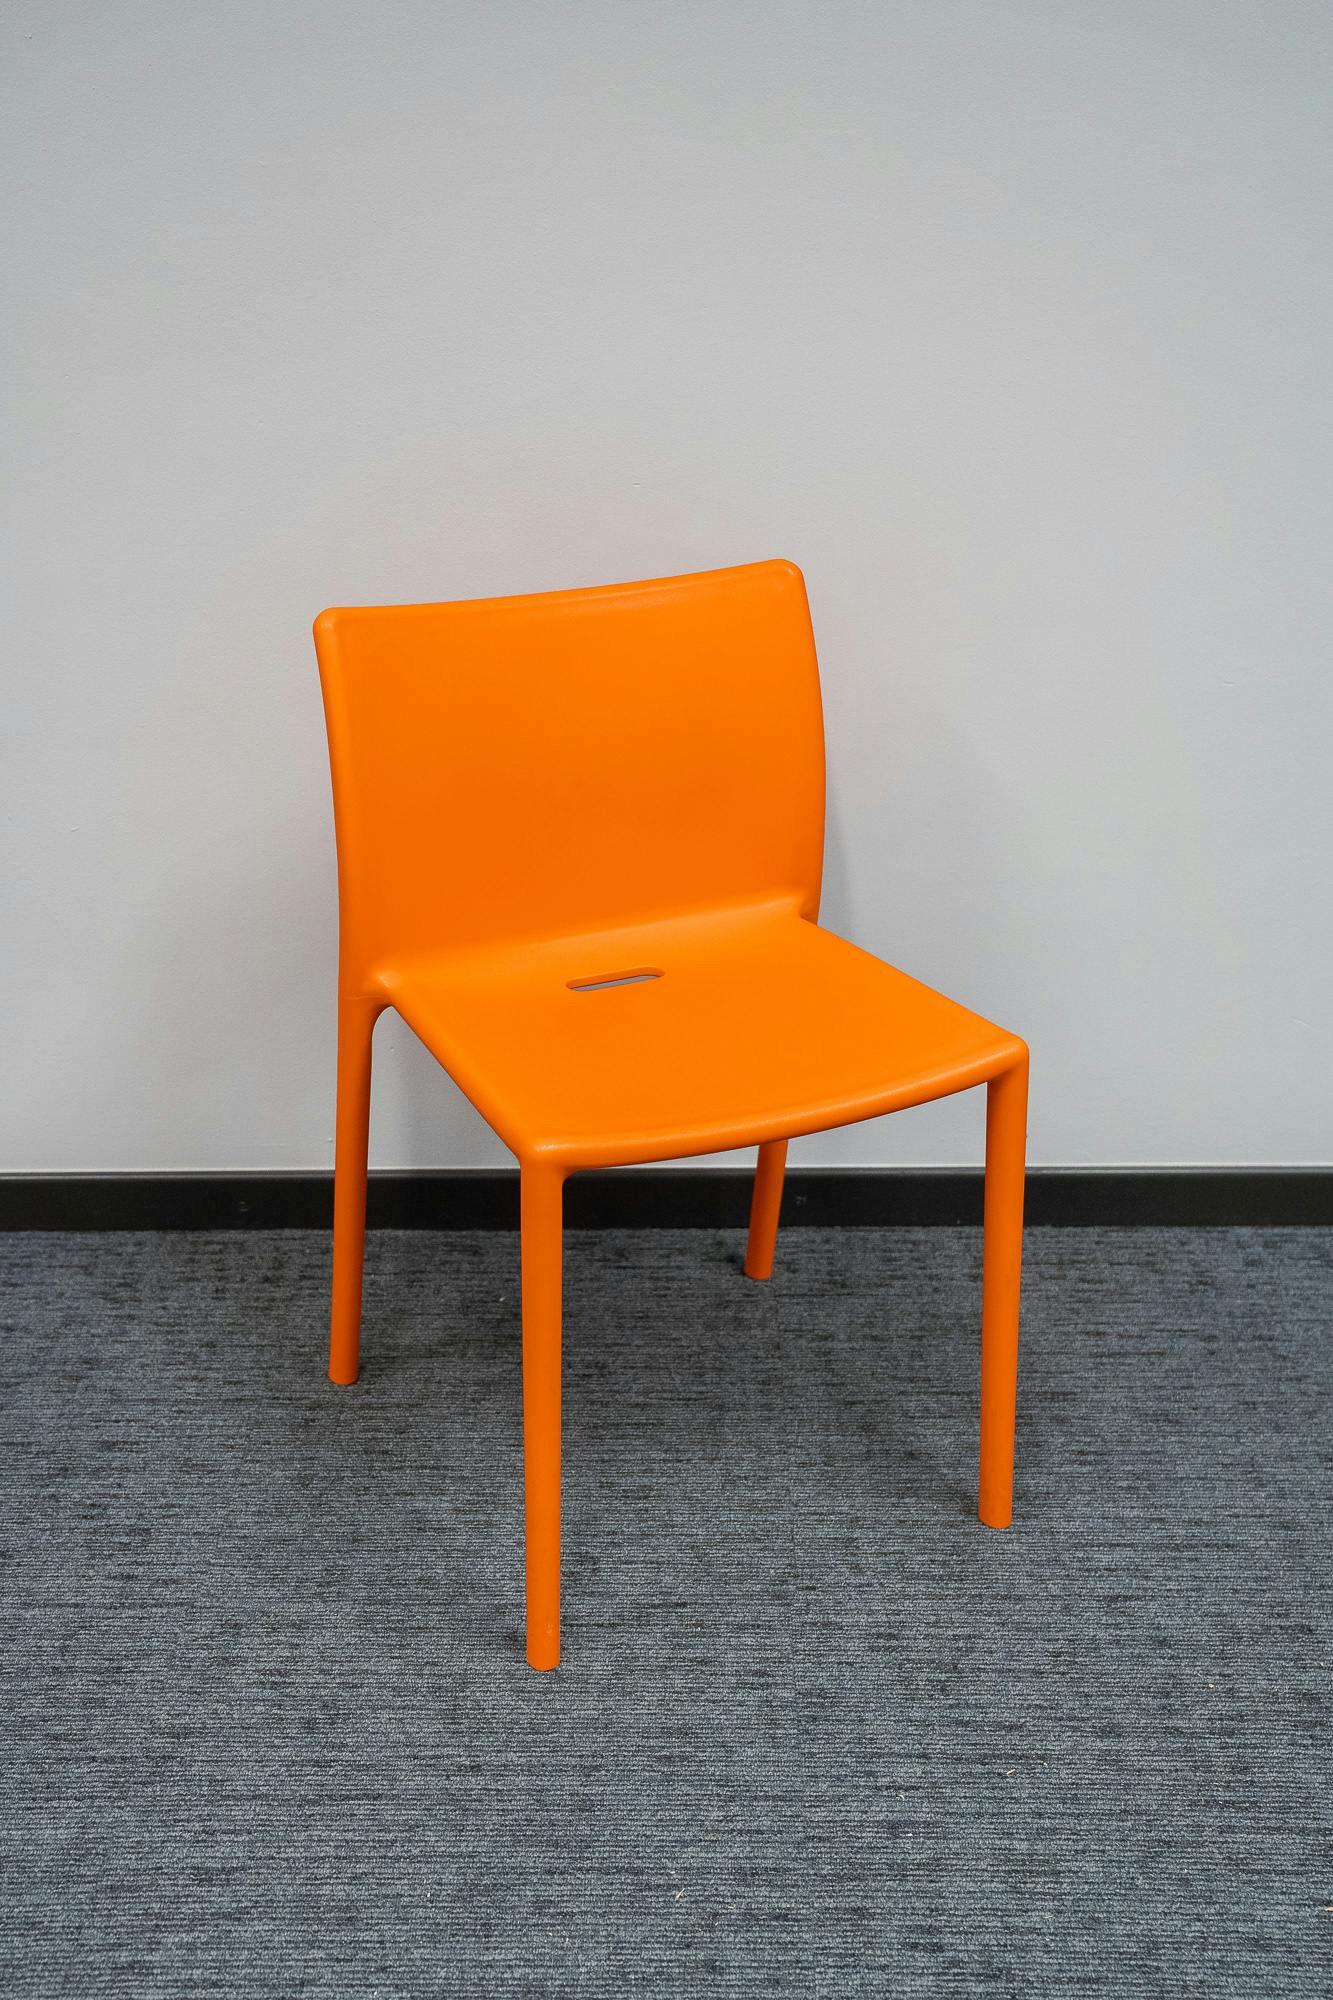 Chaise orange empilable design Jasper Morrison - Second hand quality "Chairs" - Relieve Furniture